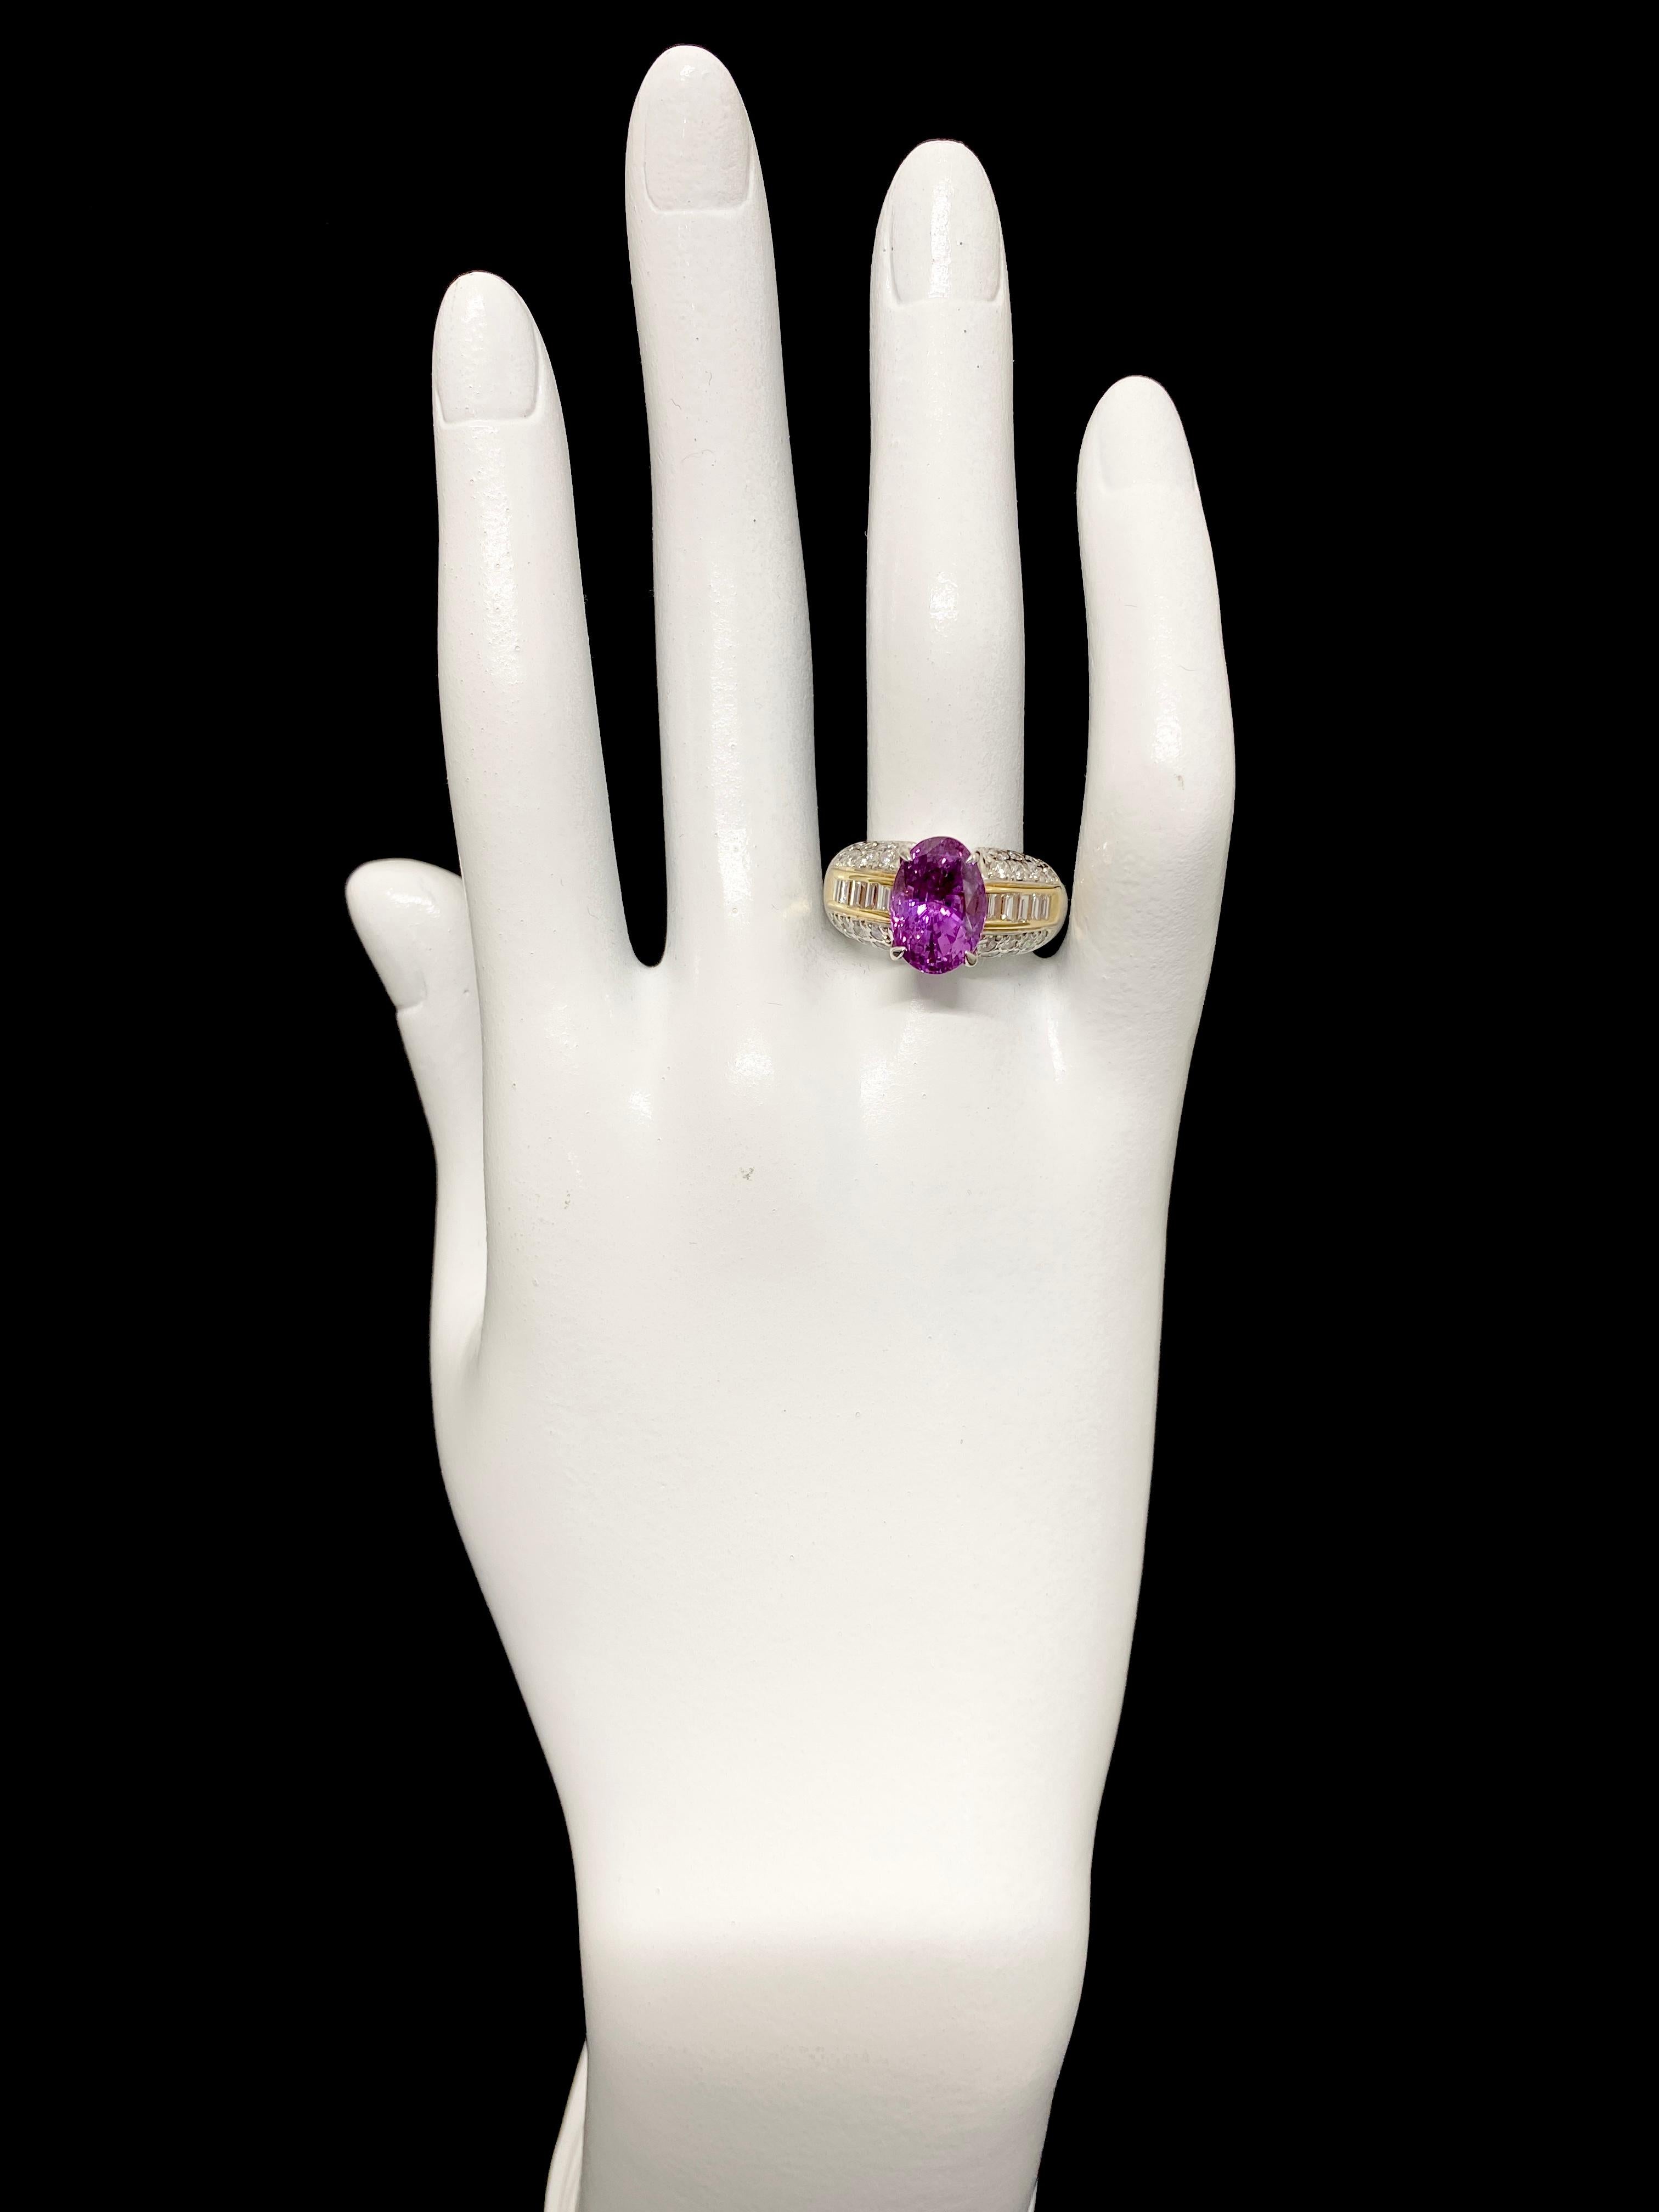 Women's GIA Certified 5.06 Carat Natural Pink Sapphire Ring Set in Platinum and 18K Gold